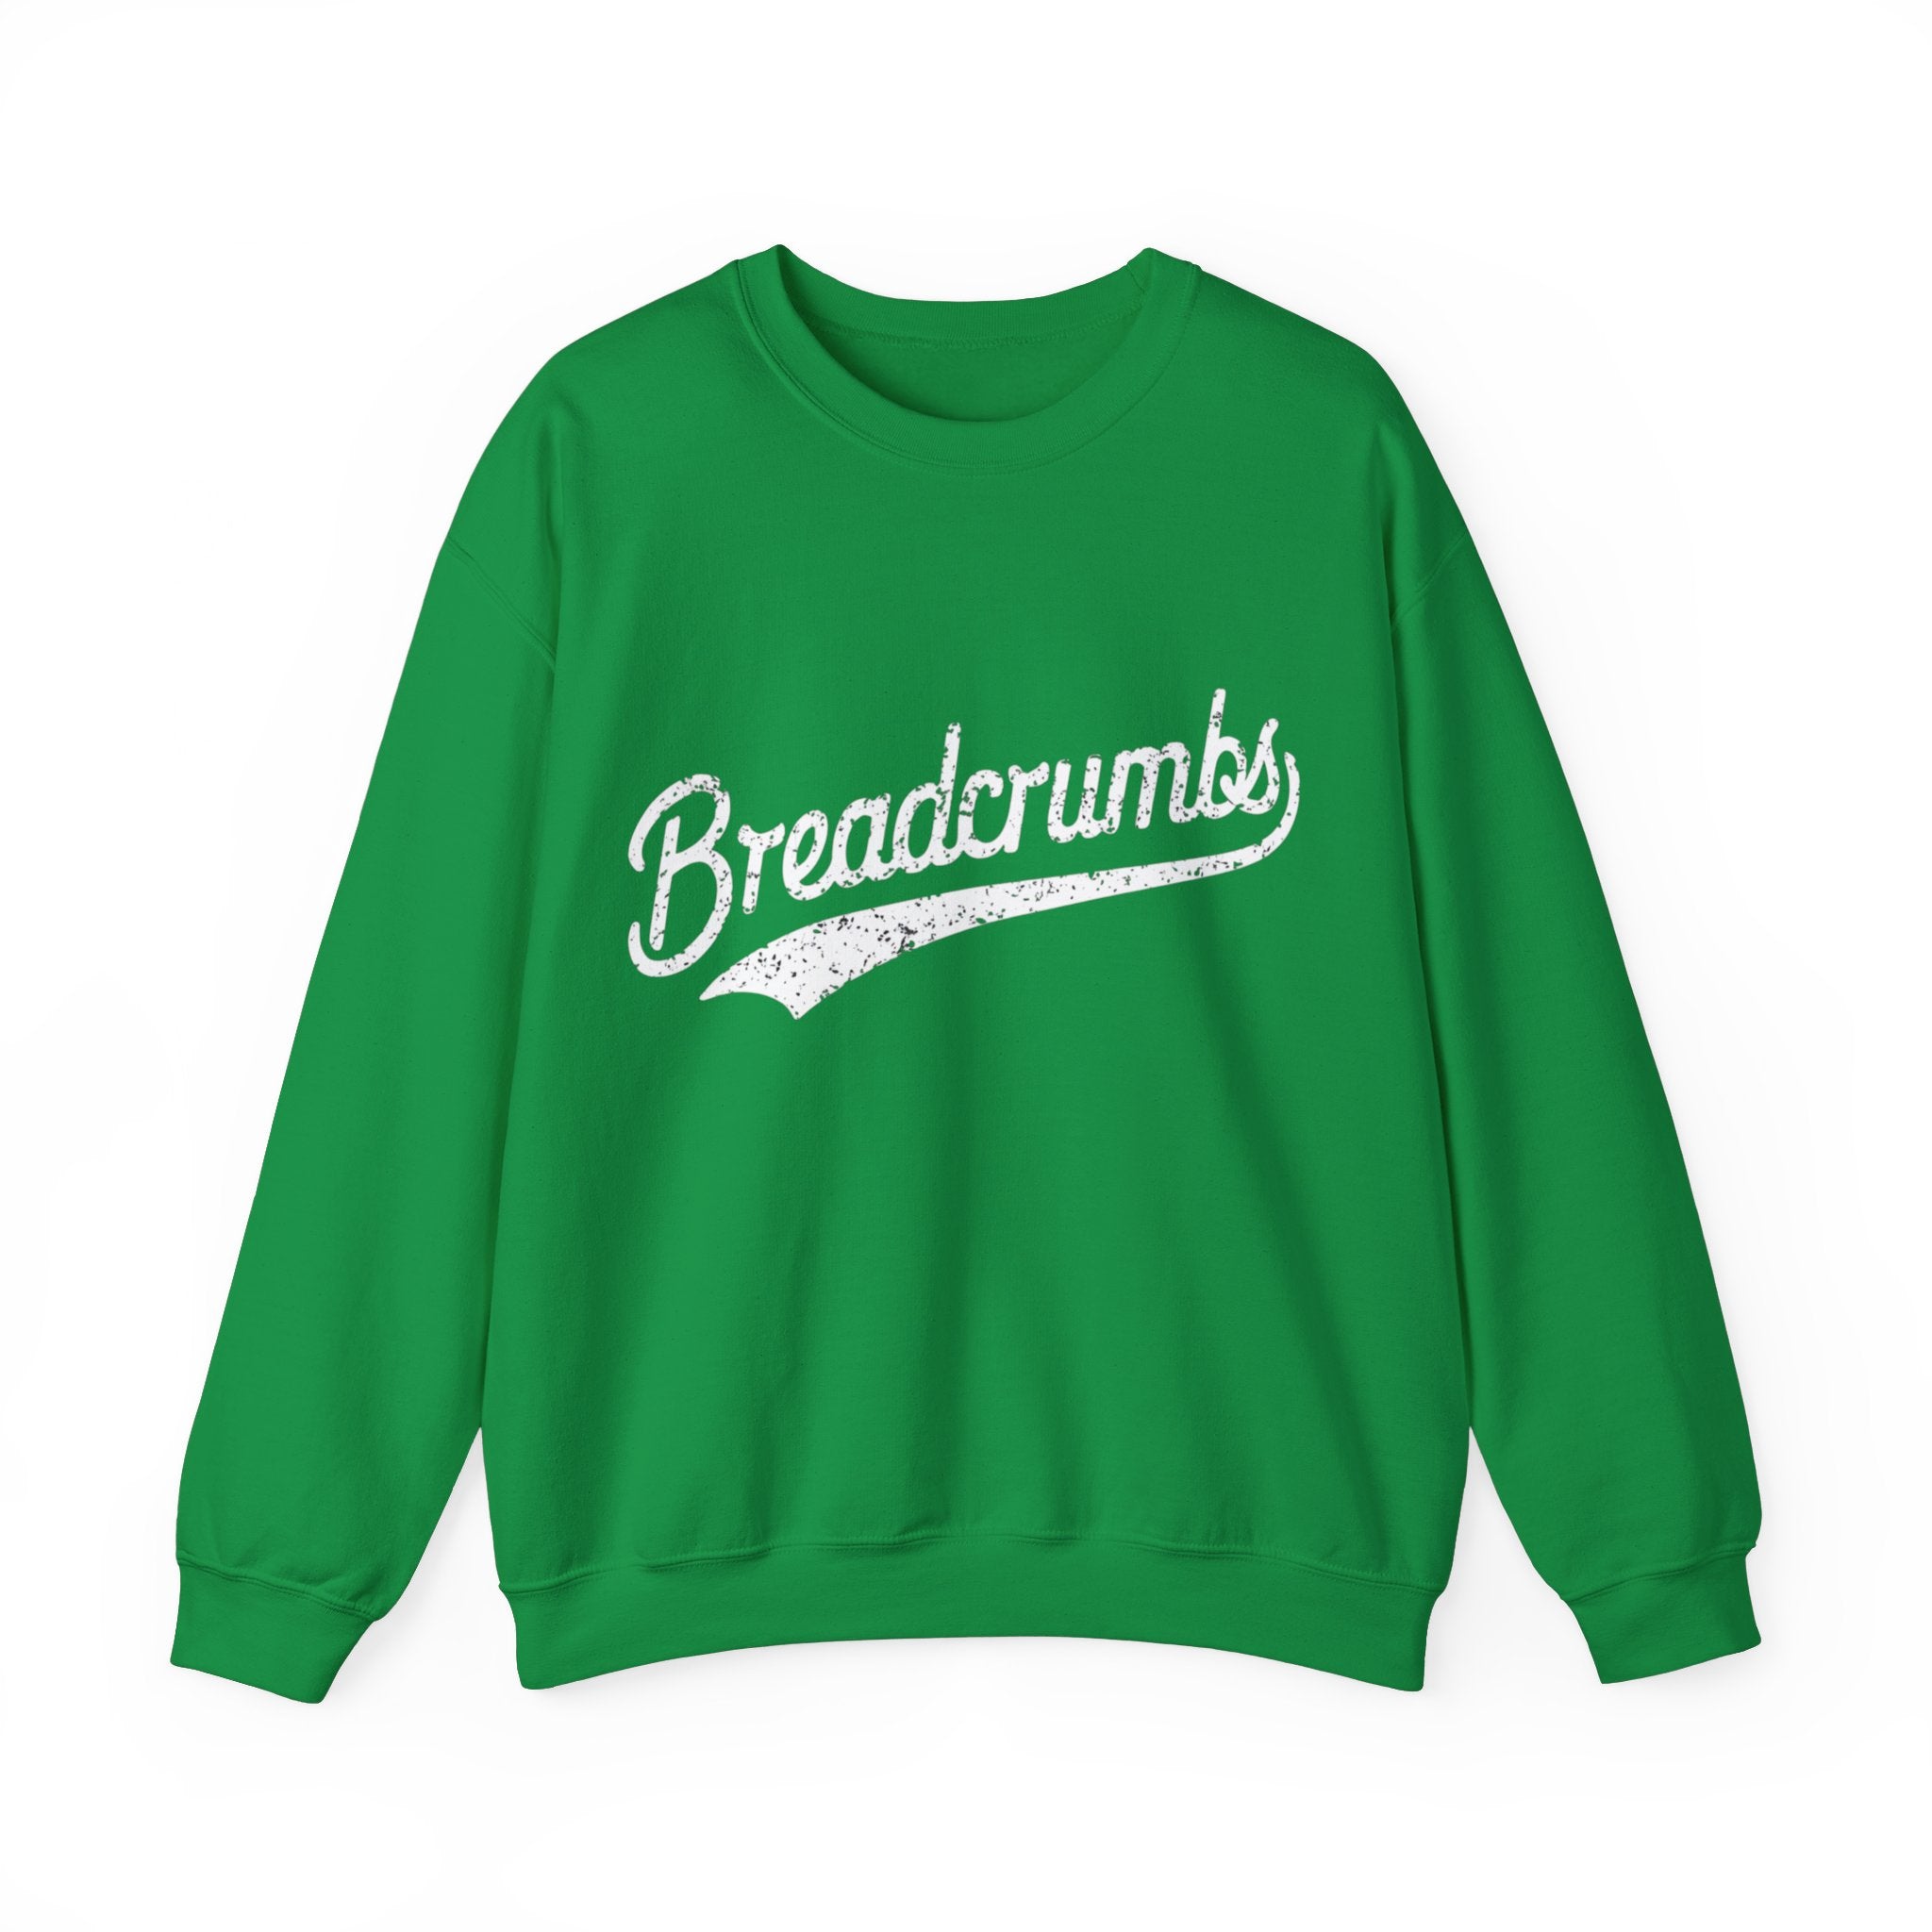 A green, cozy Breadcrumbs - Sweatshirt with the word "Breadcrumbs" written in white cursive text across the front is perfect for the colder months.